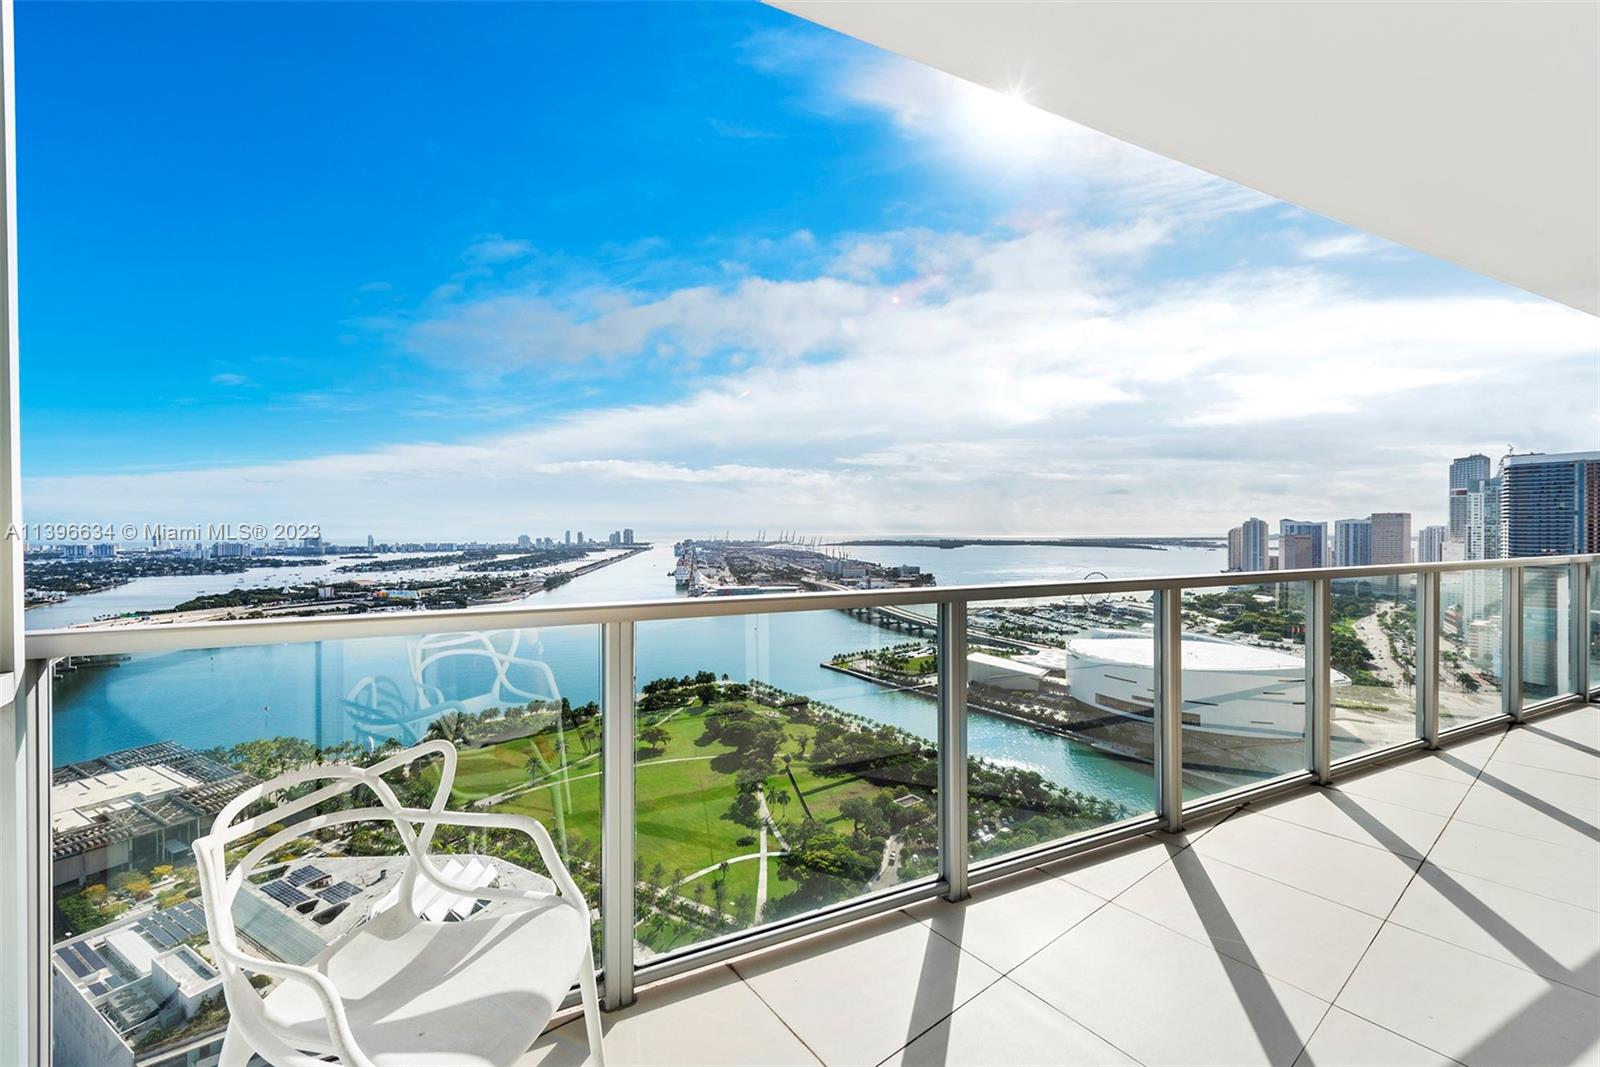 Direct Biscayne Bay & Miami Beach views from this REMODELED bright & spacious 2 Bed, 2.5 Bath Residence at Marquis. This high floor, flow-through residence features 1,477sf of living space w/private elevator landing. Refinished & remodeled unit with brand new massive walk-in closets. Stunning sunrise views from master & living room and sunset views from Guest Bedroom. Open kitchen w/ Viking appliances, large laundry room with full-sized washer/dryer. High ceilings throughout. Building amenities & services include 24/7 concierge, security, & valet - swimming pool & lap pool, restaurant with delivery available, spa, fitness center, basketball & more. Minutes away from FTX Arena, Design District, Wynwood, Brickell, Perez' Art Museum, & Arsht Center. 10 min from Miami International Airport.